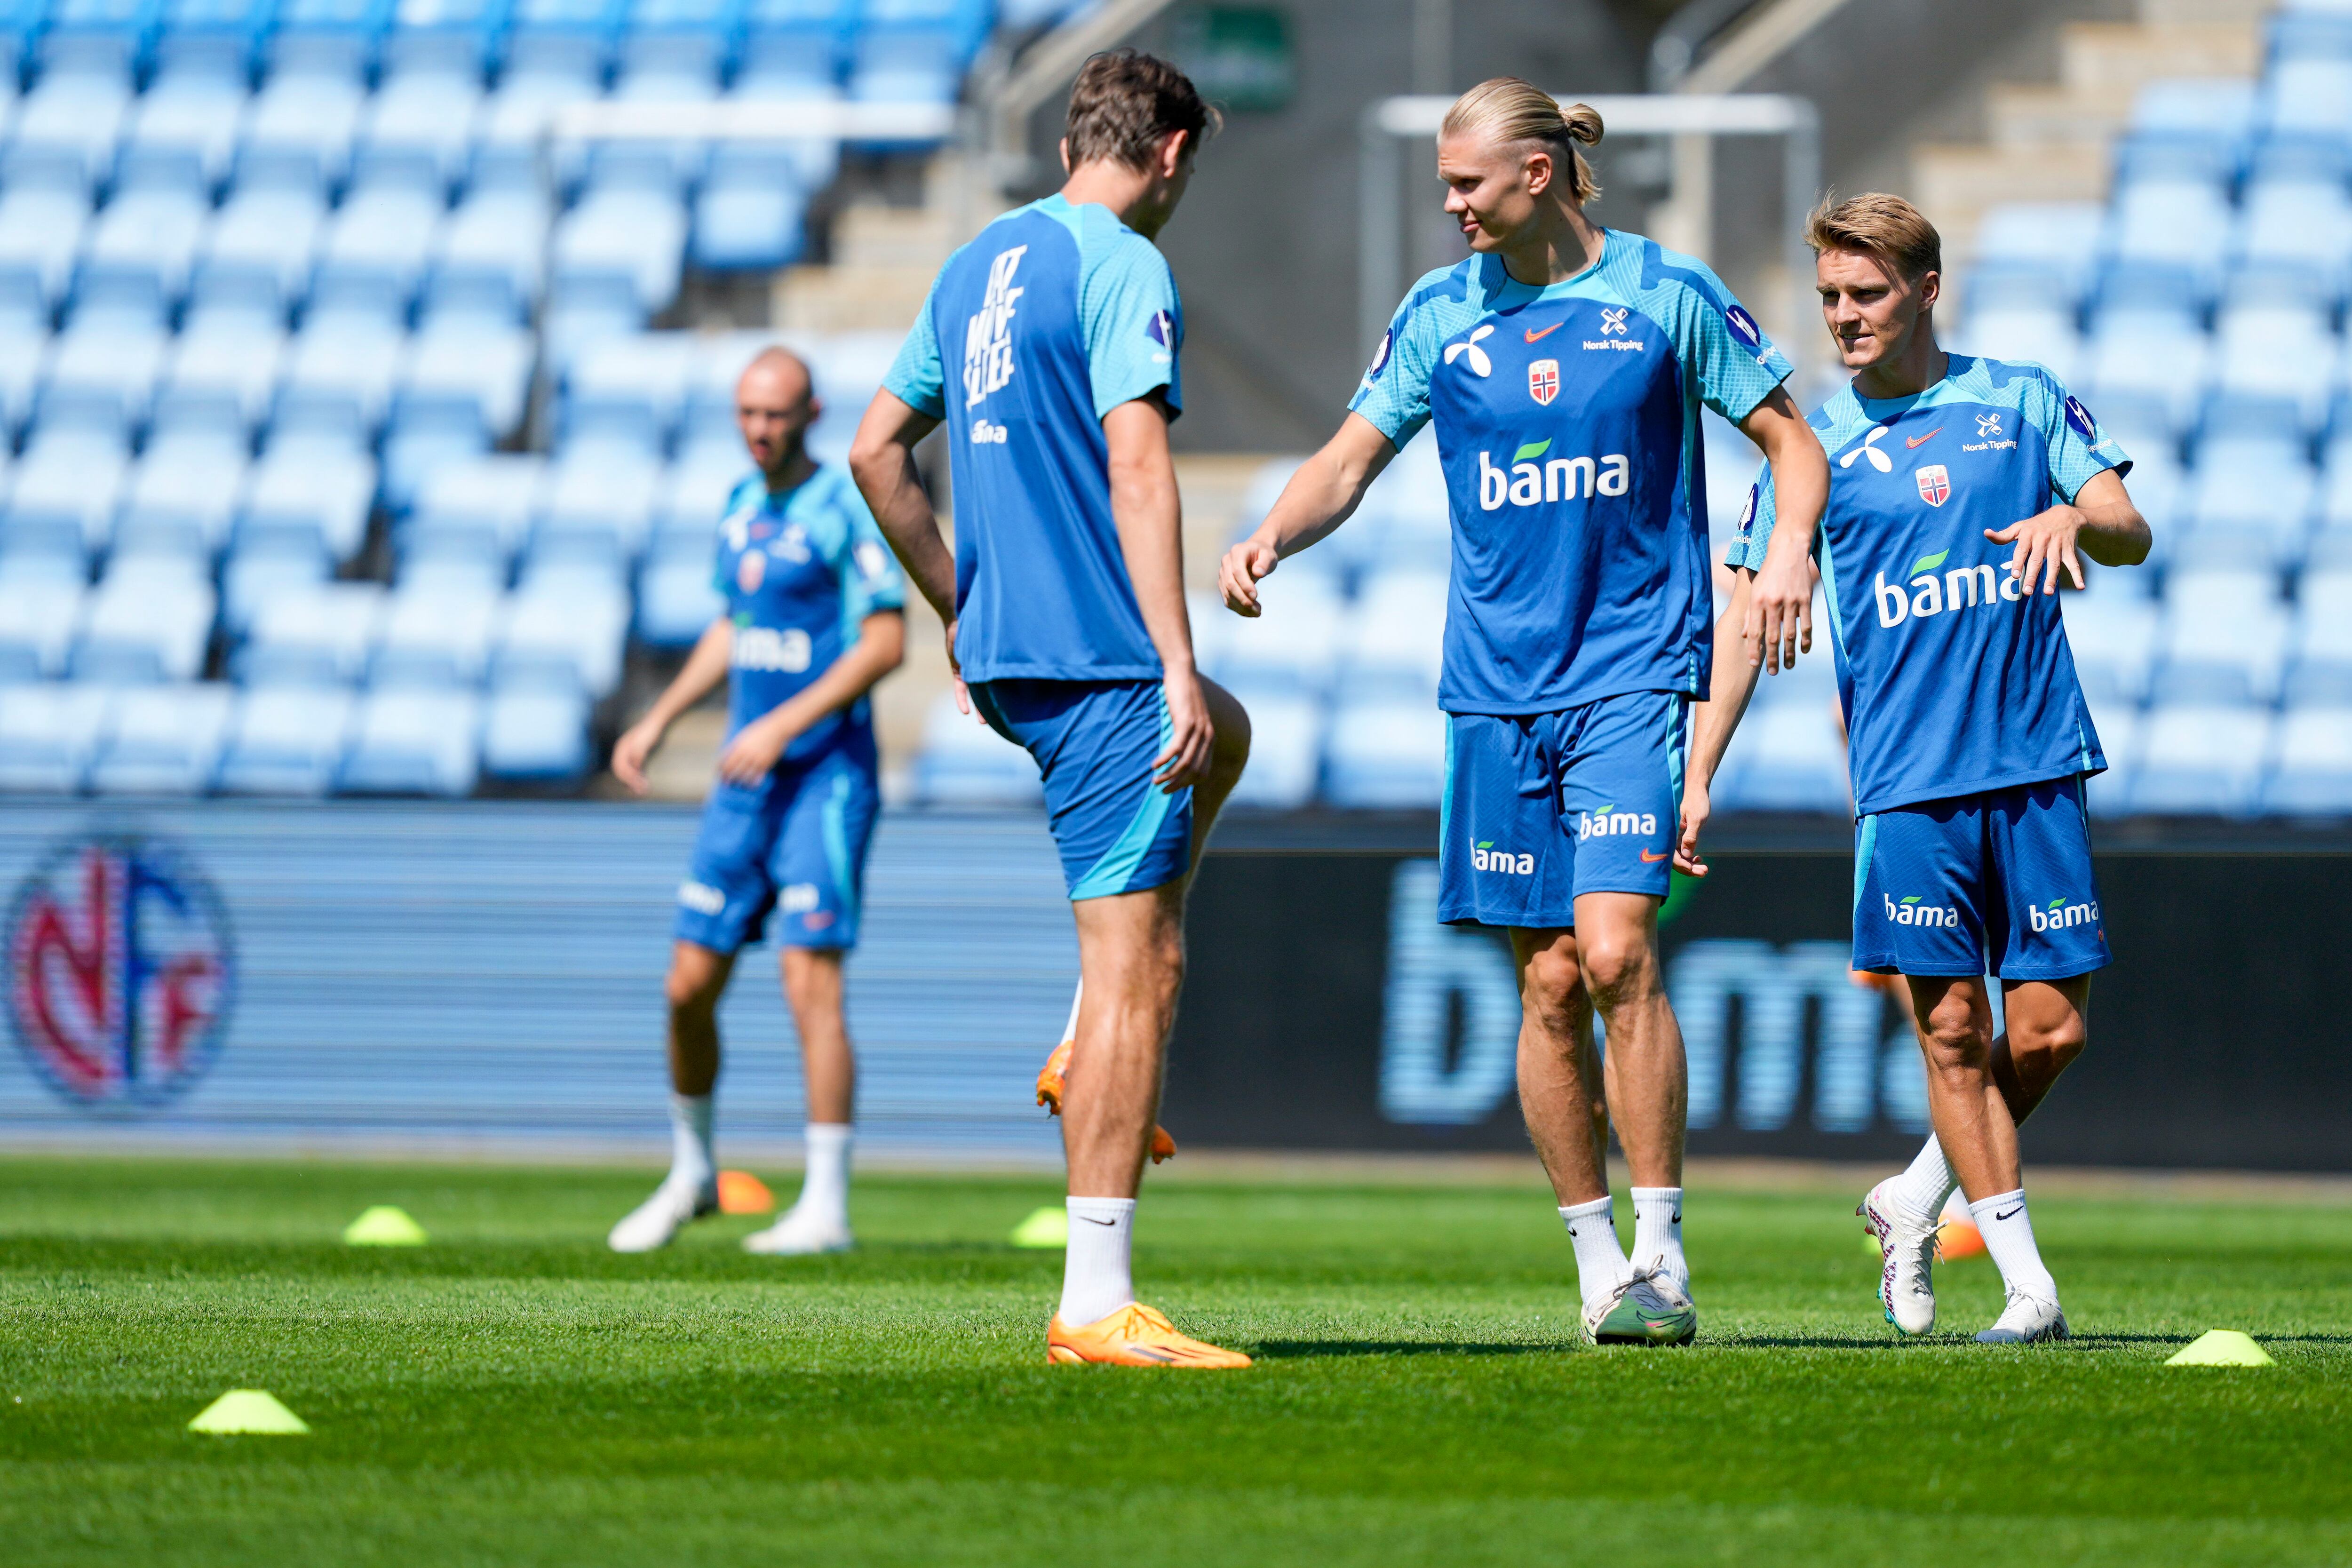 Oslo (Norway), 14/06/2023.- Norway's Erling Haaland (2R) and Martin Odegaard (R) attend a training session of the national soccer team held in Oslo, Norway, 14 June 2023. Norway faces Scotland and Cyprus in qualifying matches for the UEFA EURO 2024. (Chipre, Noruega) EFE/EPA/Fredrik Varfjell NORWAY OUT
